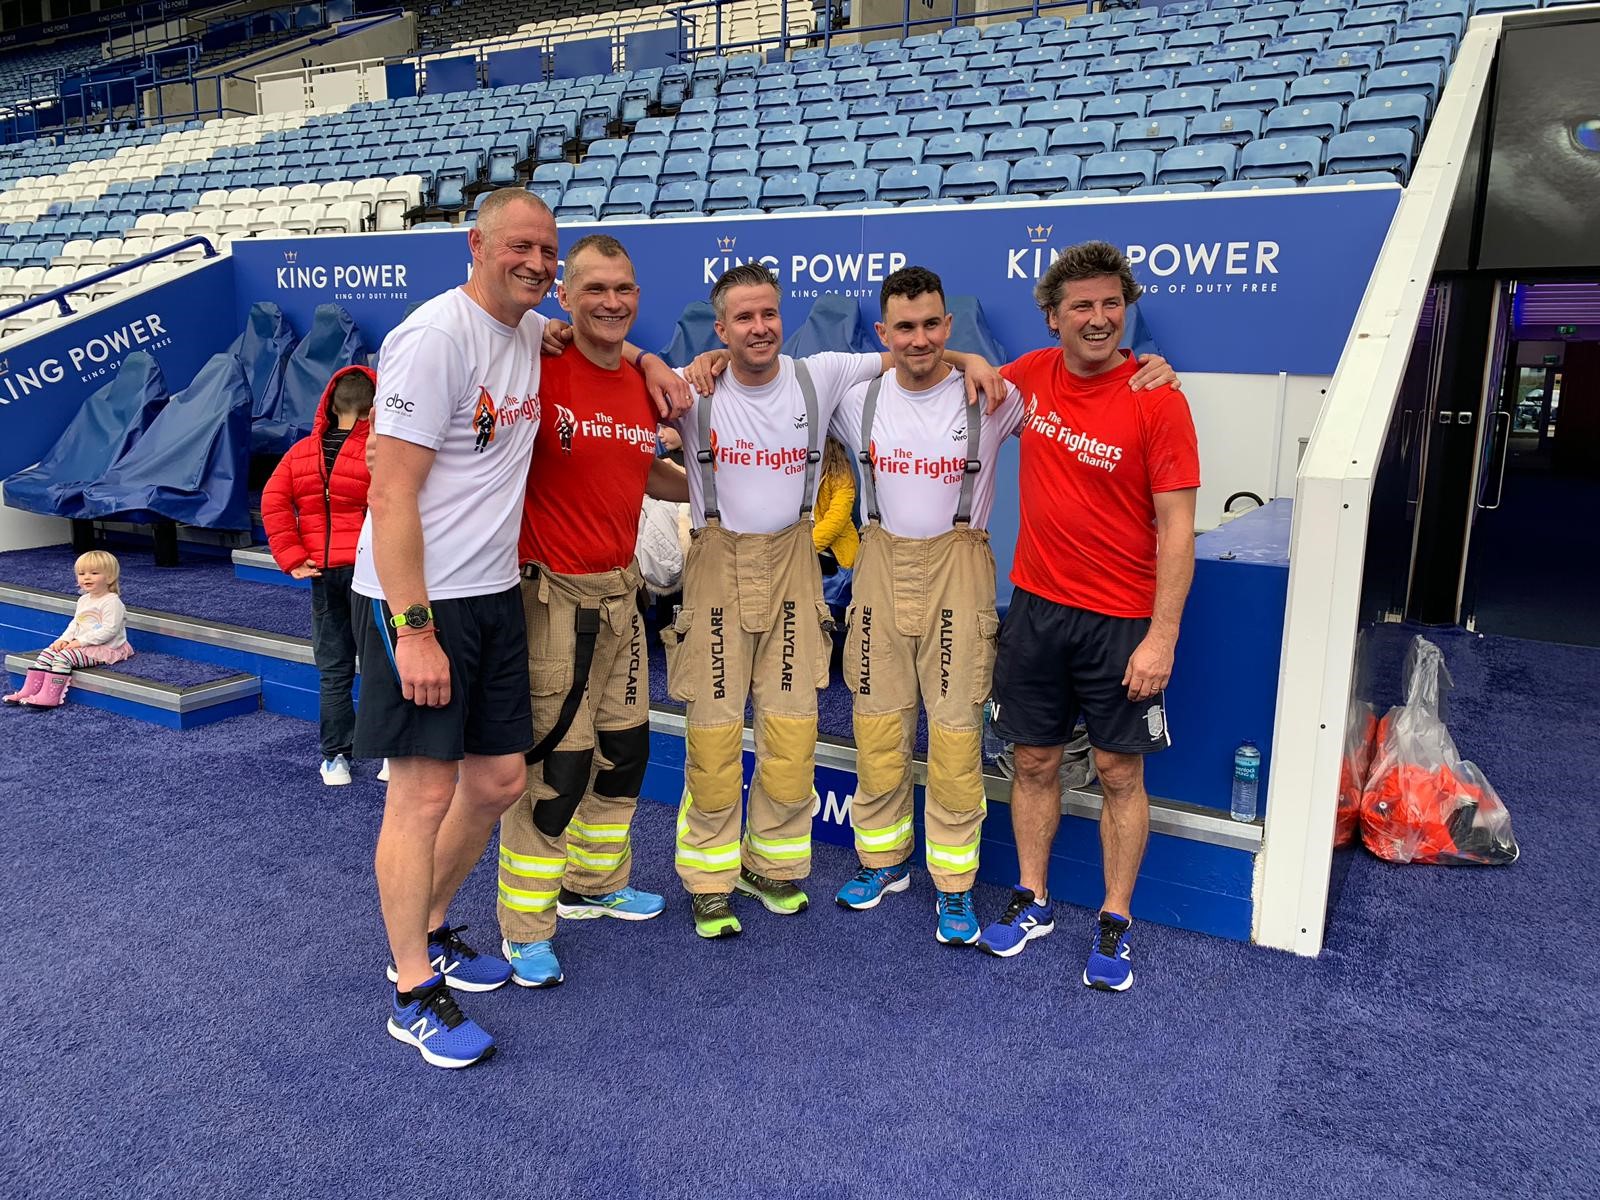 Leicester firefighters’ marathon efforts at site of helicopter tragedy